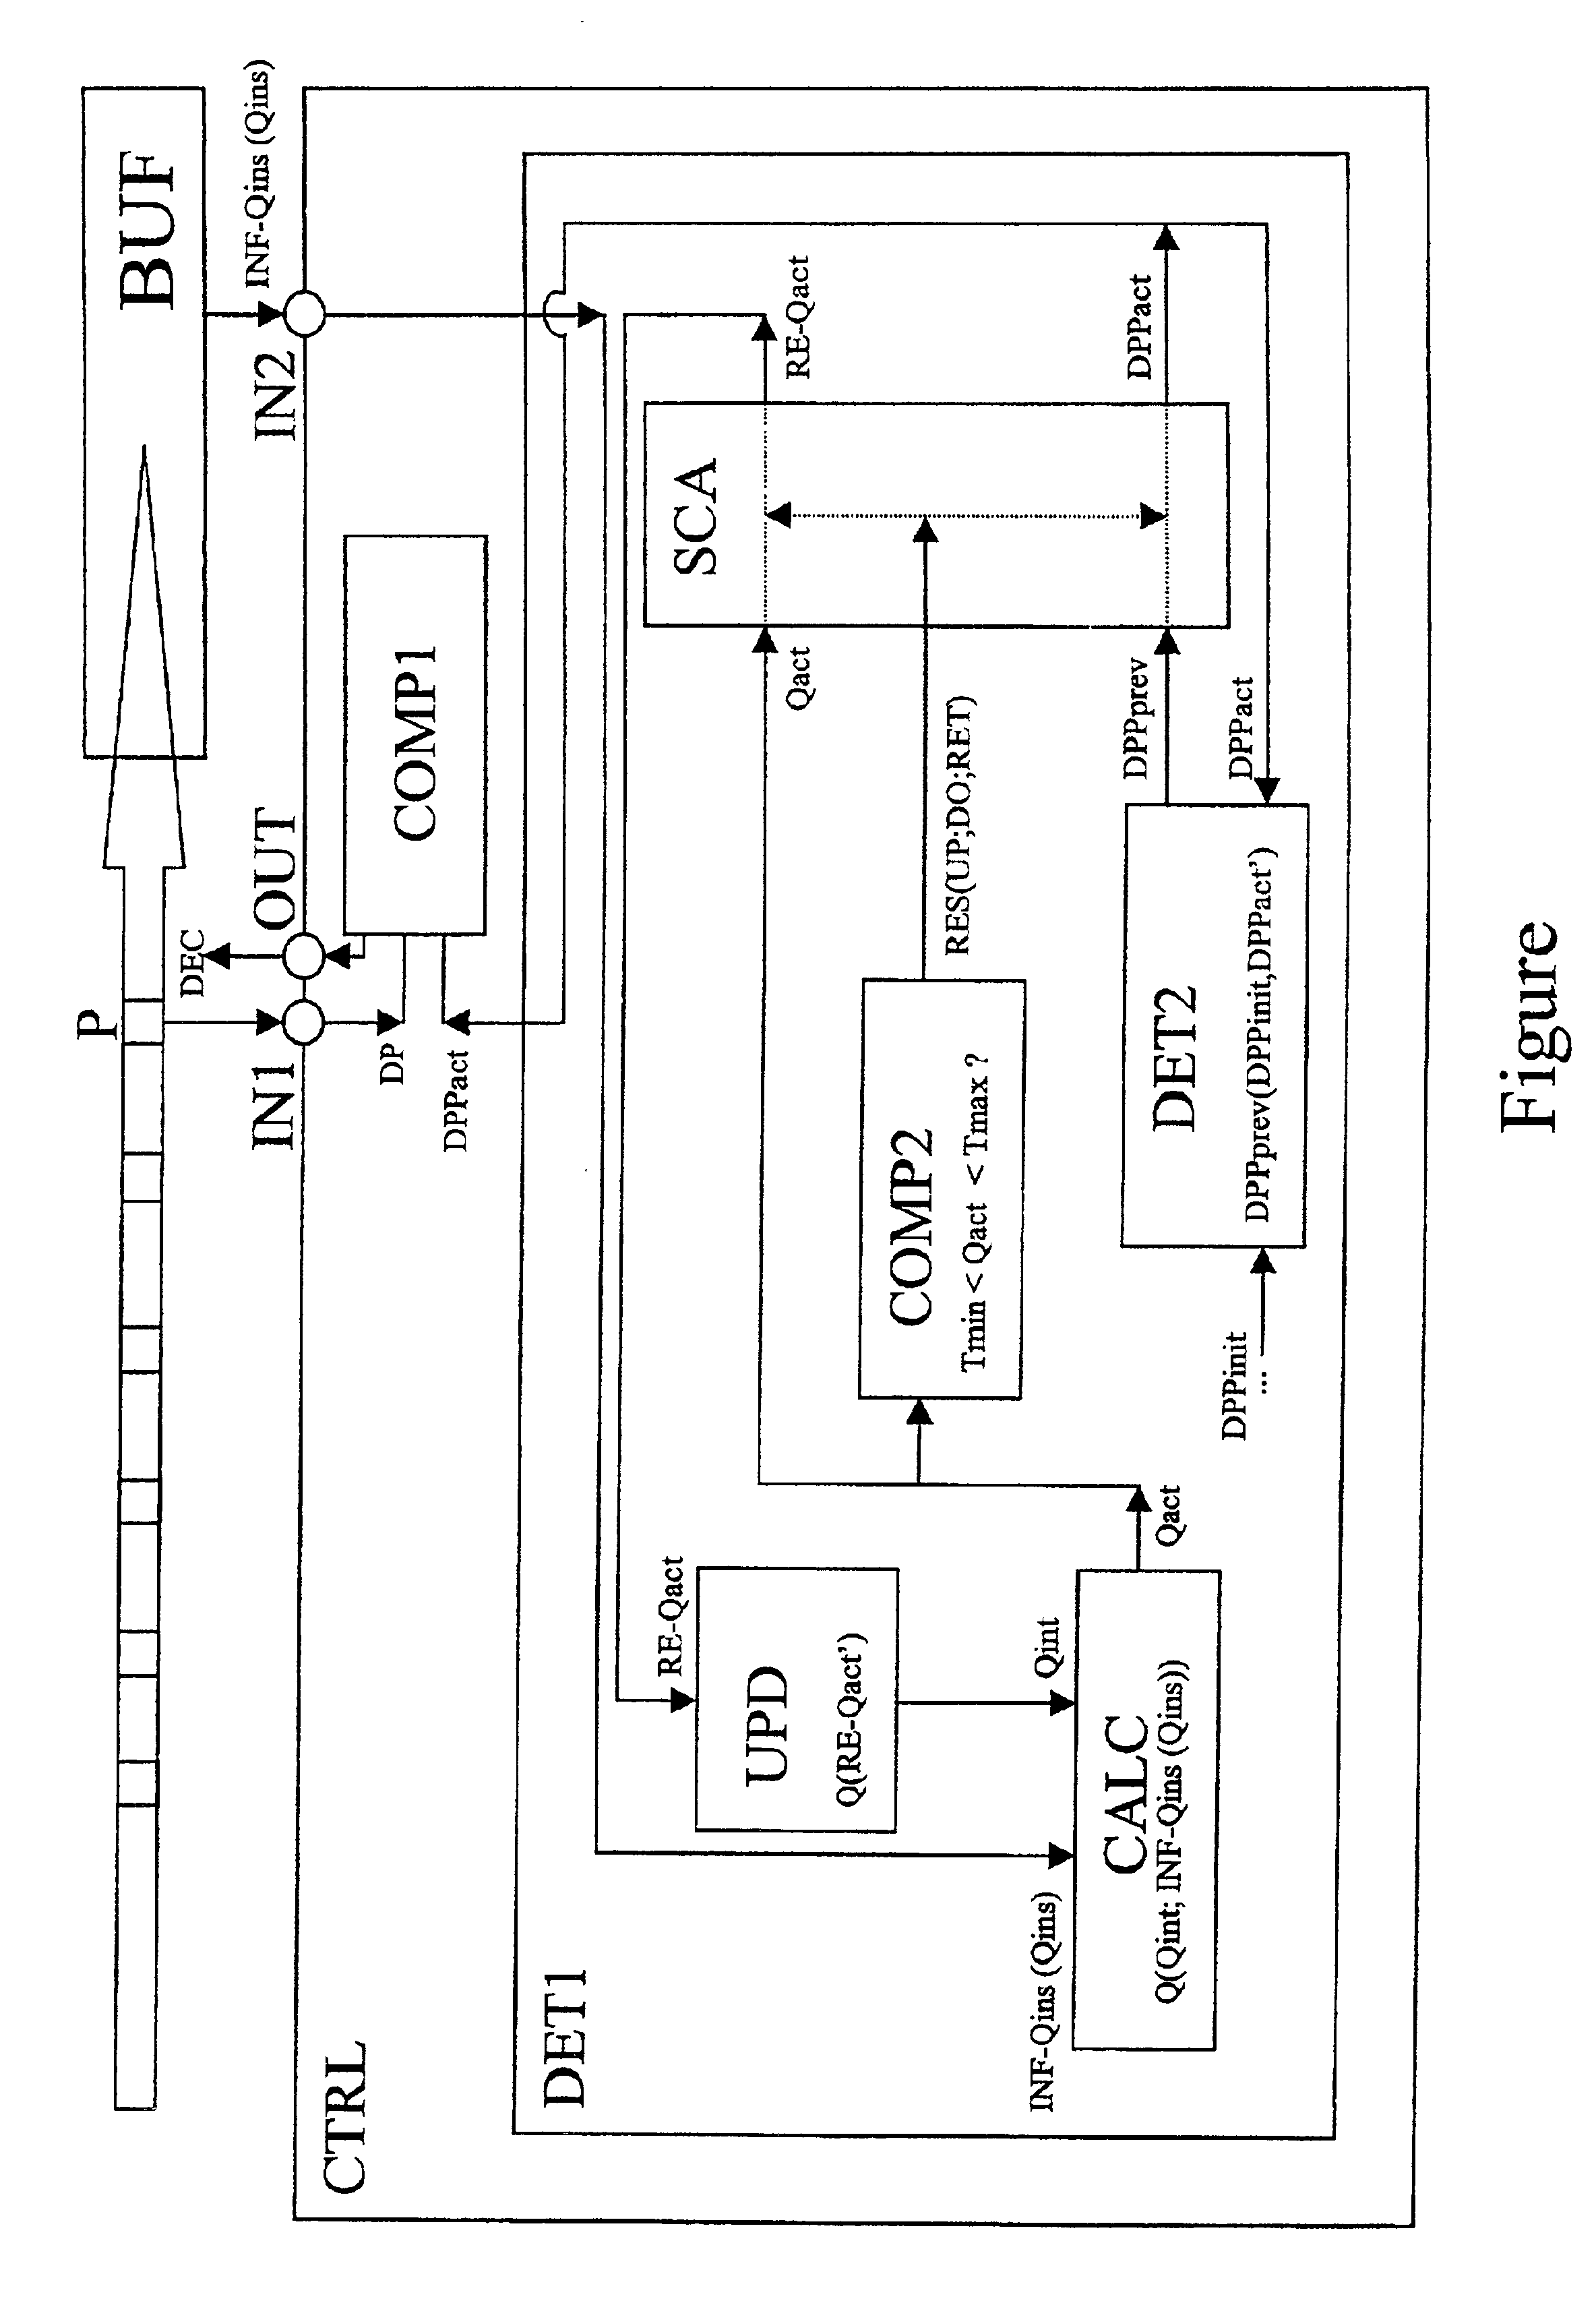 Method to generate an acceptance decision in a telecommunication system